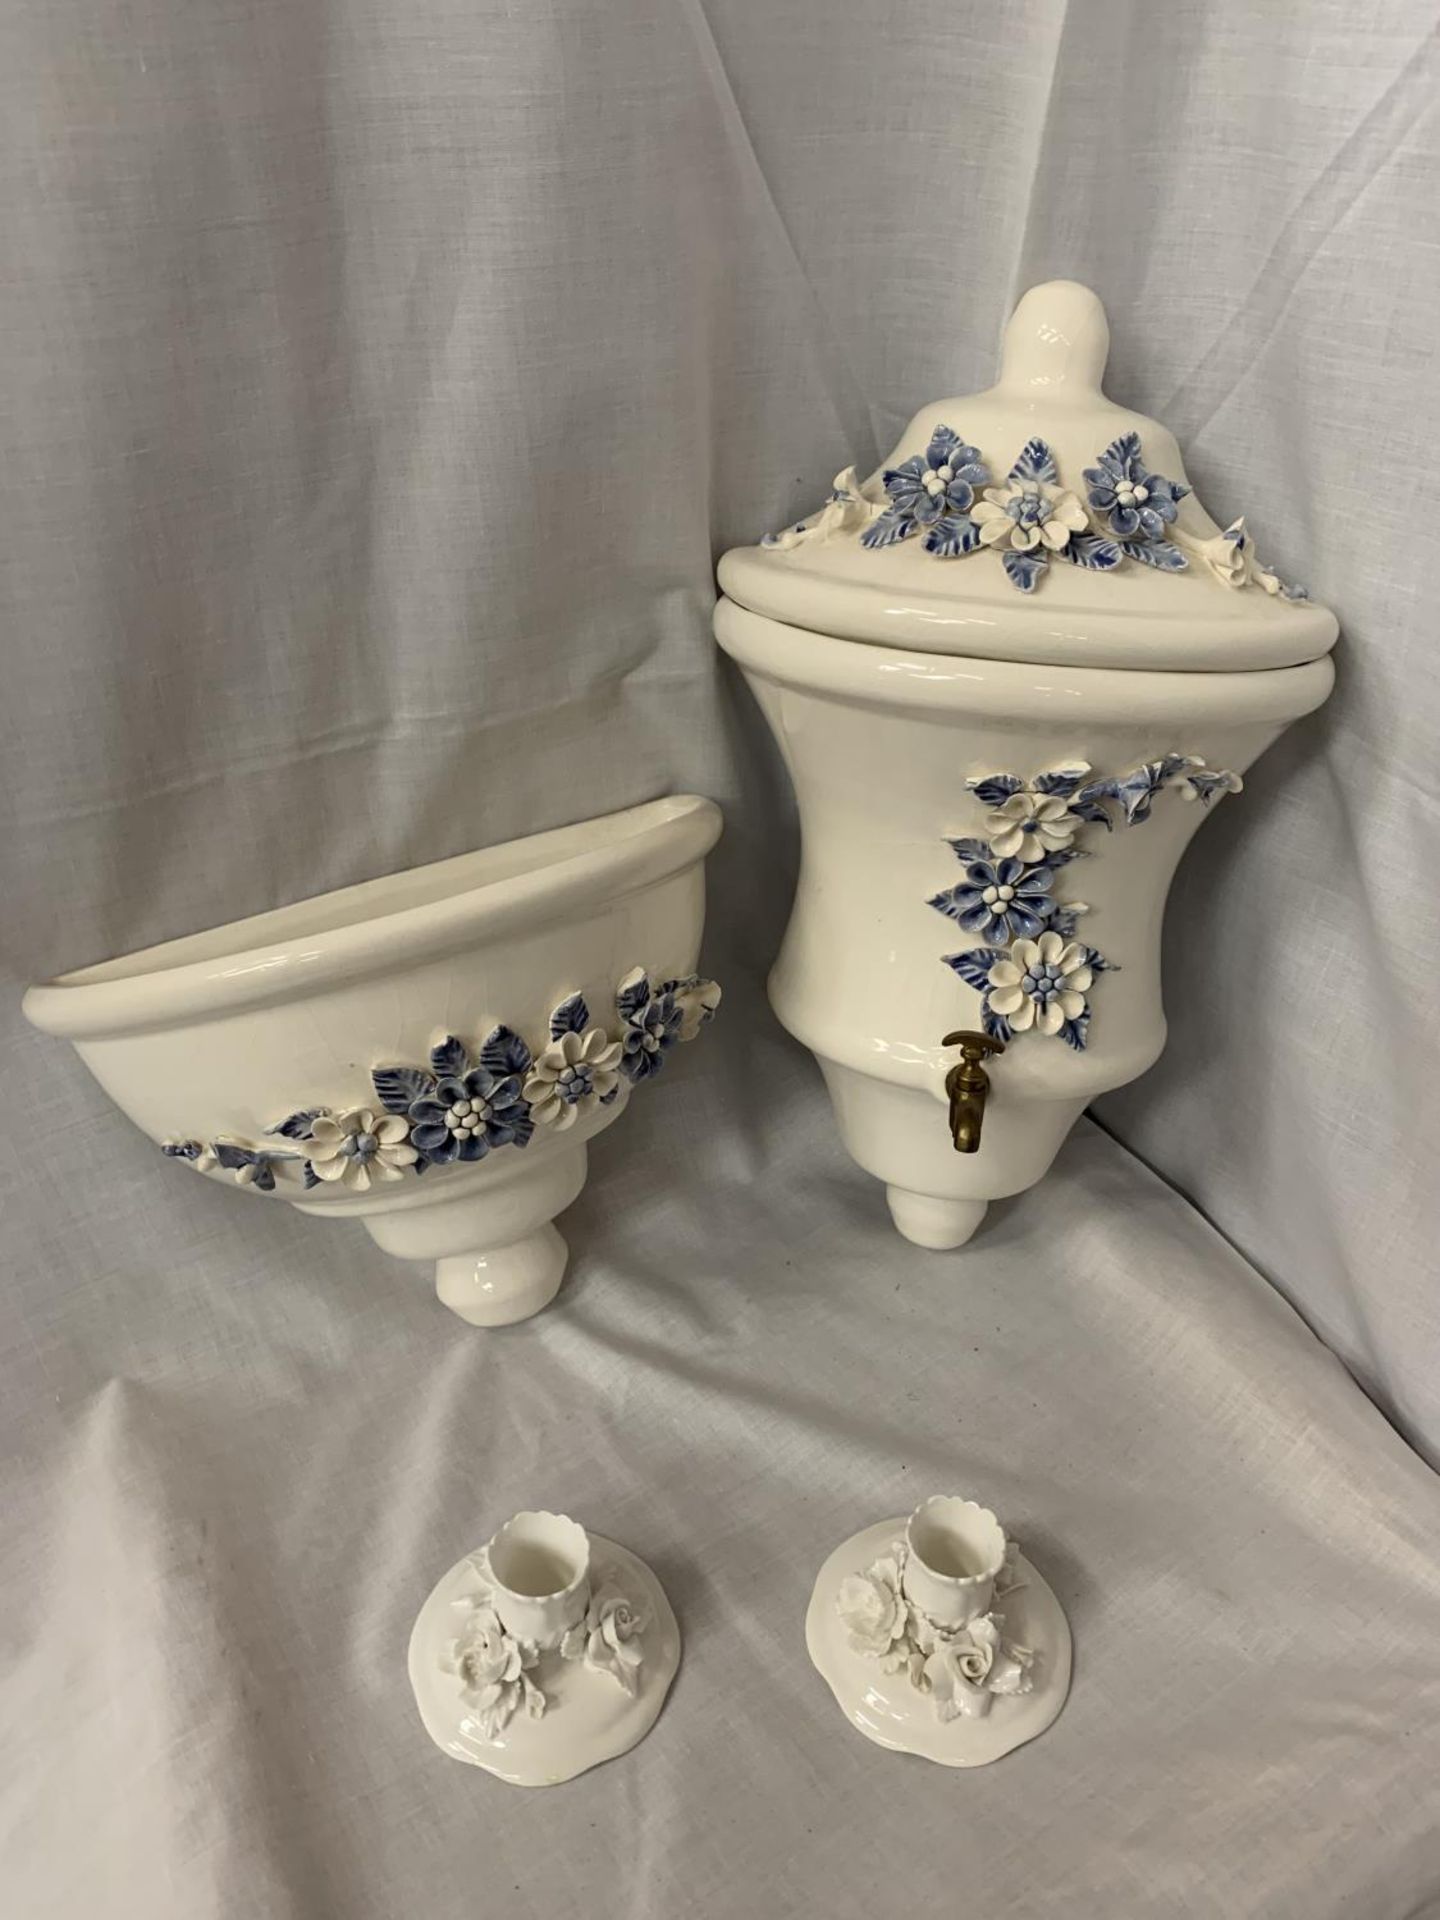 A PAIR OF CERAMIC WALL MOUNTED WATER VESSEL AND BOWLWITH DECORATIVE BLUE AND WHITE FLOWERS IN